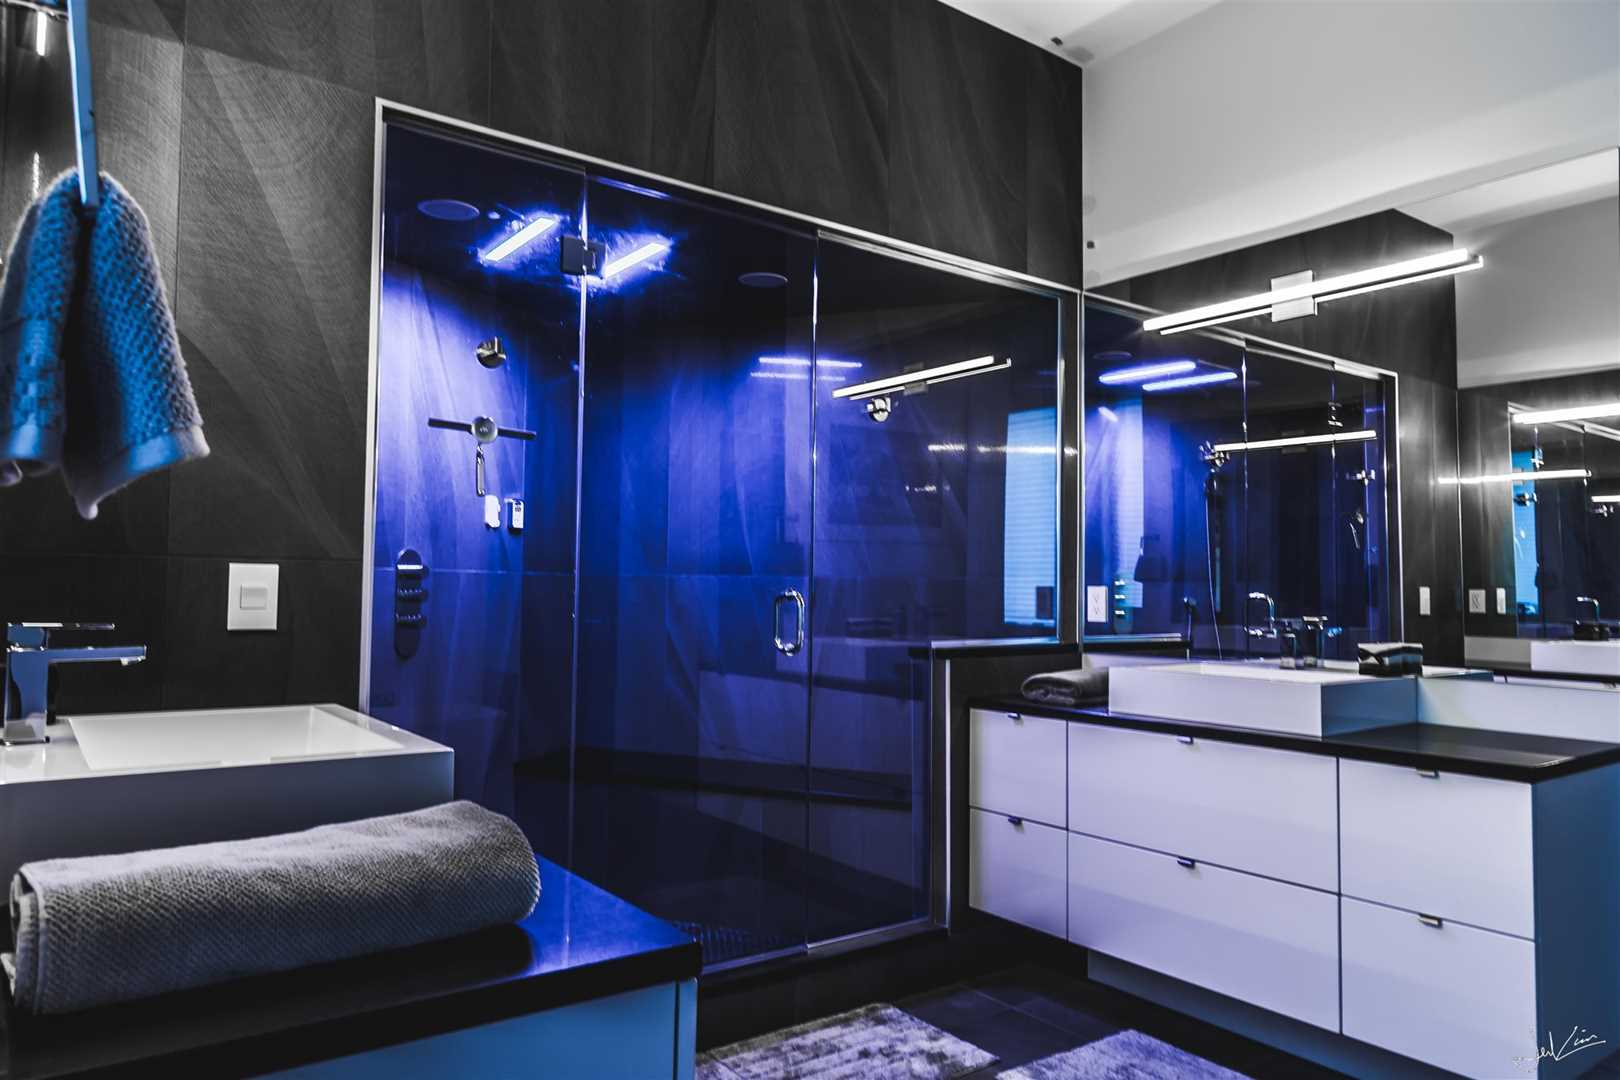 Black and white bathroom with shower that lights up blue